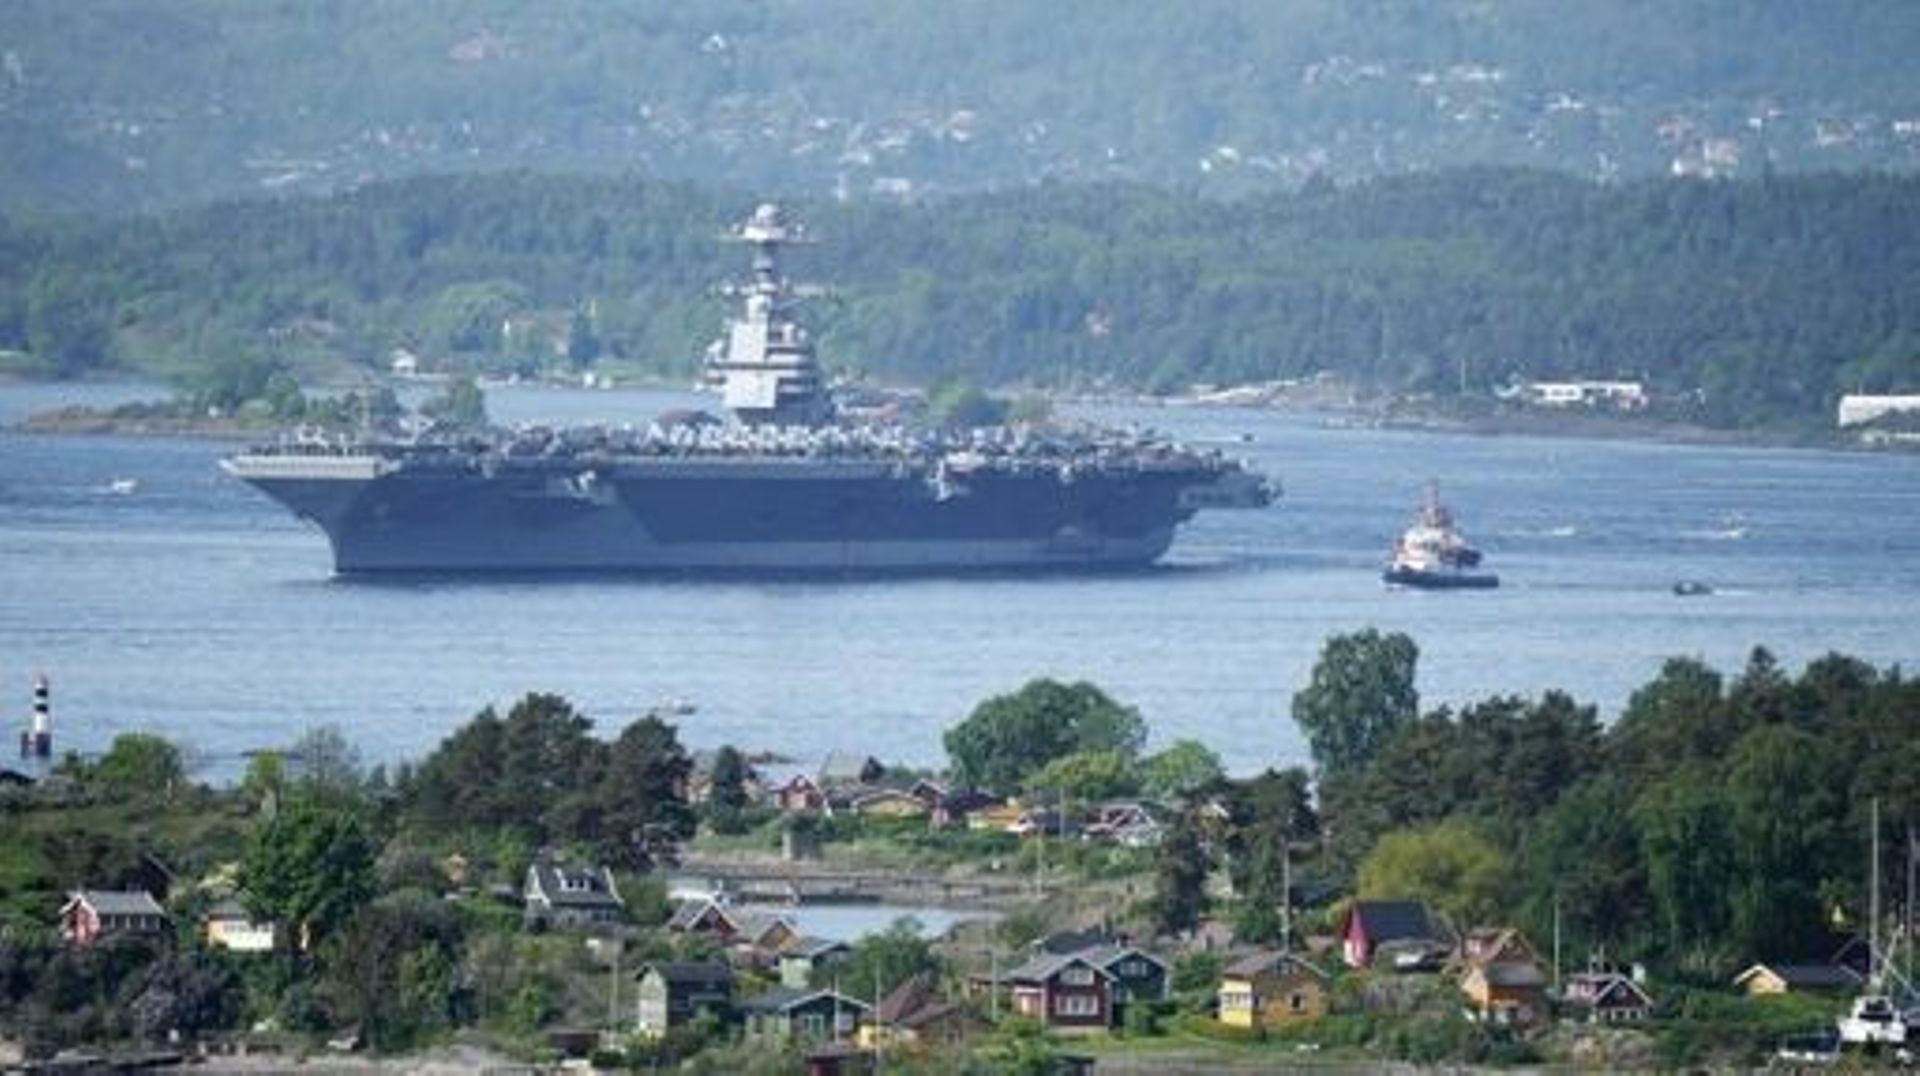 The 337-metre (1,106-foot) USS Gerald R. Ford aircraft carrier of the US Navy is seen in the Oslo Fjord, here seen from Ekebergskrenten in Oslo, Norway, on May 24, 2023. The ship is the world's largest warship and will be in port in Oslo for four days. Ru